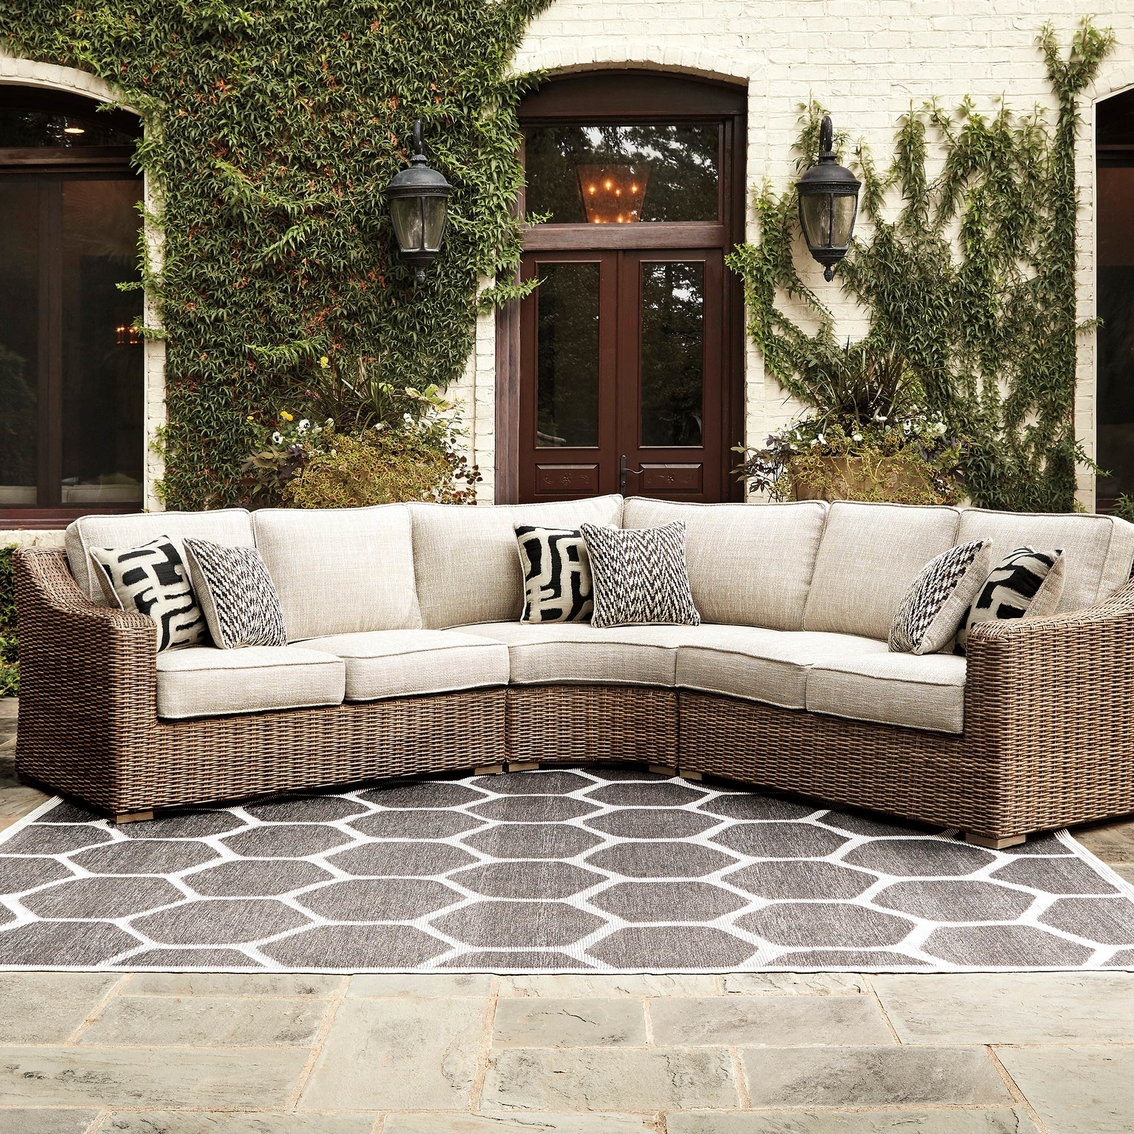 Signature Design by Ashley Beachcroft 3 pc. Outdoor Sectional - Image 2 of 7